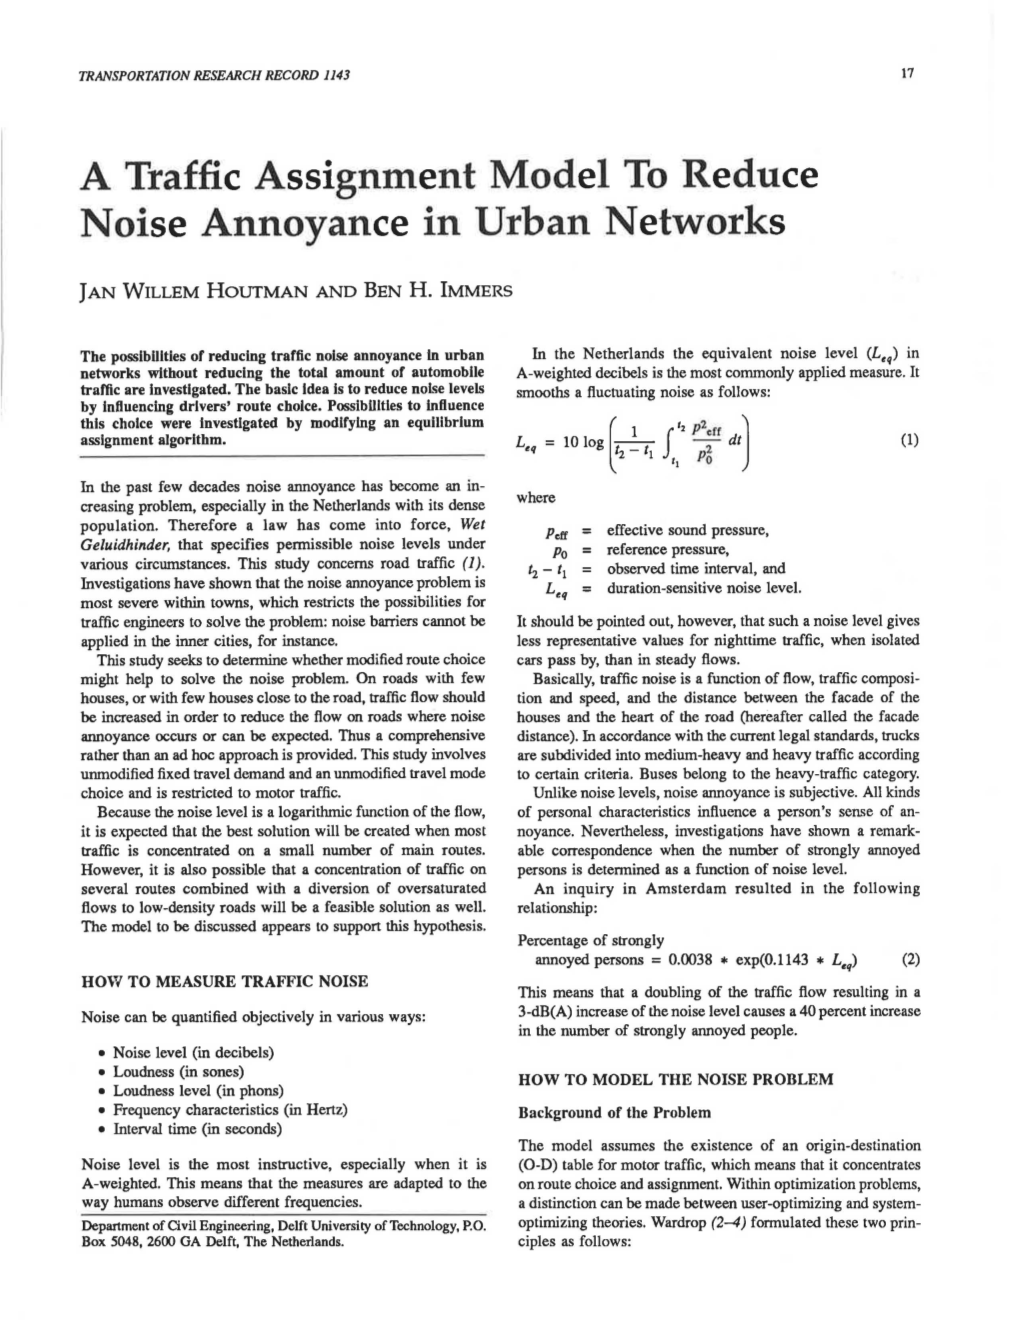 A Traffic Assignment Model to Reduce Noise Annoyance in Urban Networks